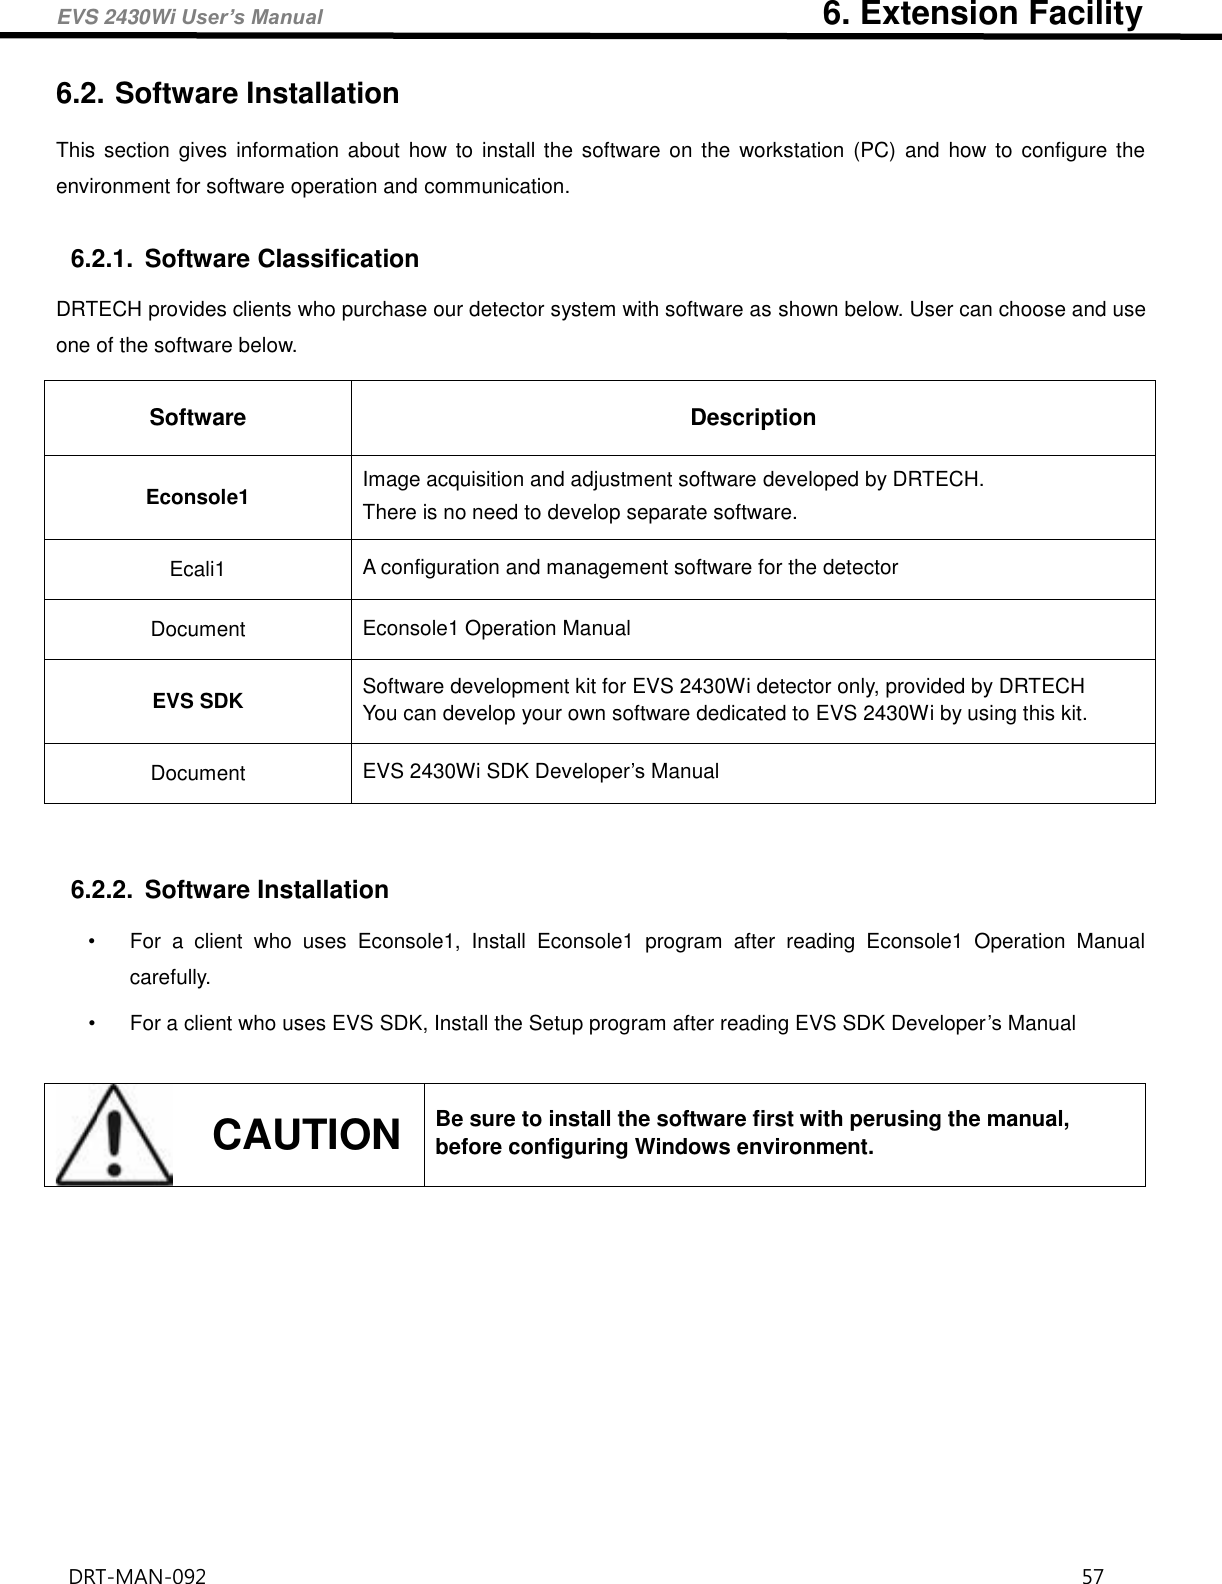 EVS 2430Wi User’s Manual                                                            6. Extension Facility DRT-MAN-092                                                                                    57   6.2. Software Installation This  section  gives  information about  how  to  install the software  on  the  workstation  (PC)  and how to configure  the environment for software operation and communication.  6.2.1.  Software Classification DRTECH provides clients who purchase our detector system with software as shown below. User can choose and use one of the software below. Software Description Econsole1 Image acquisition and adjustment software developed by DRTECH. There is no need to develop separate software. Ecali1 A configuration and management software for the detector Document Econsole1 Operation Manual EVS SDK Software development kit for EVS 2430Wi detector only, provided by DRTECH You can develop your own software dedicated to EVS 2430Wi by using this kit. Document EVS 2430Wi SDK Developer’s Manual    6.2.2.  Software Installation •  For  a  client  who  uses  Econsole1,  Install  Econsole1  program  after  reading  Econsole1  Operation  Manual carefully.     •  For a client who uses EVS SDK, Install the Setup program after reading EVS SDK Developer’s Manual     CAUTION Be sure to install the software first with perusing the manual, before configuring Windows environment.     